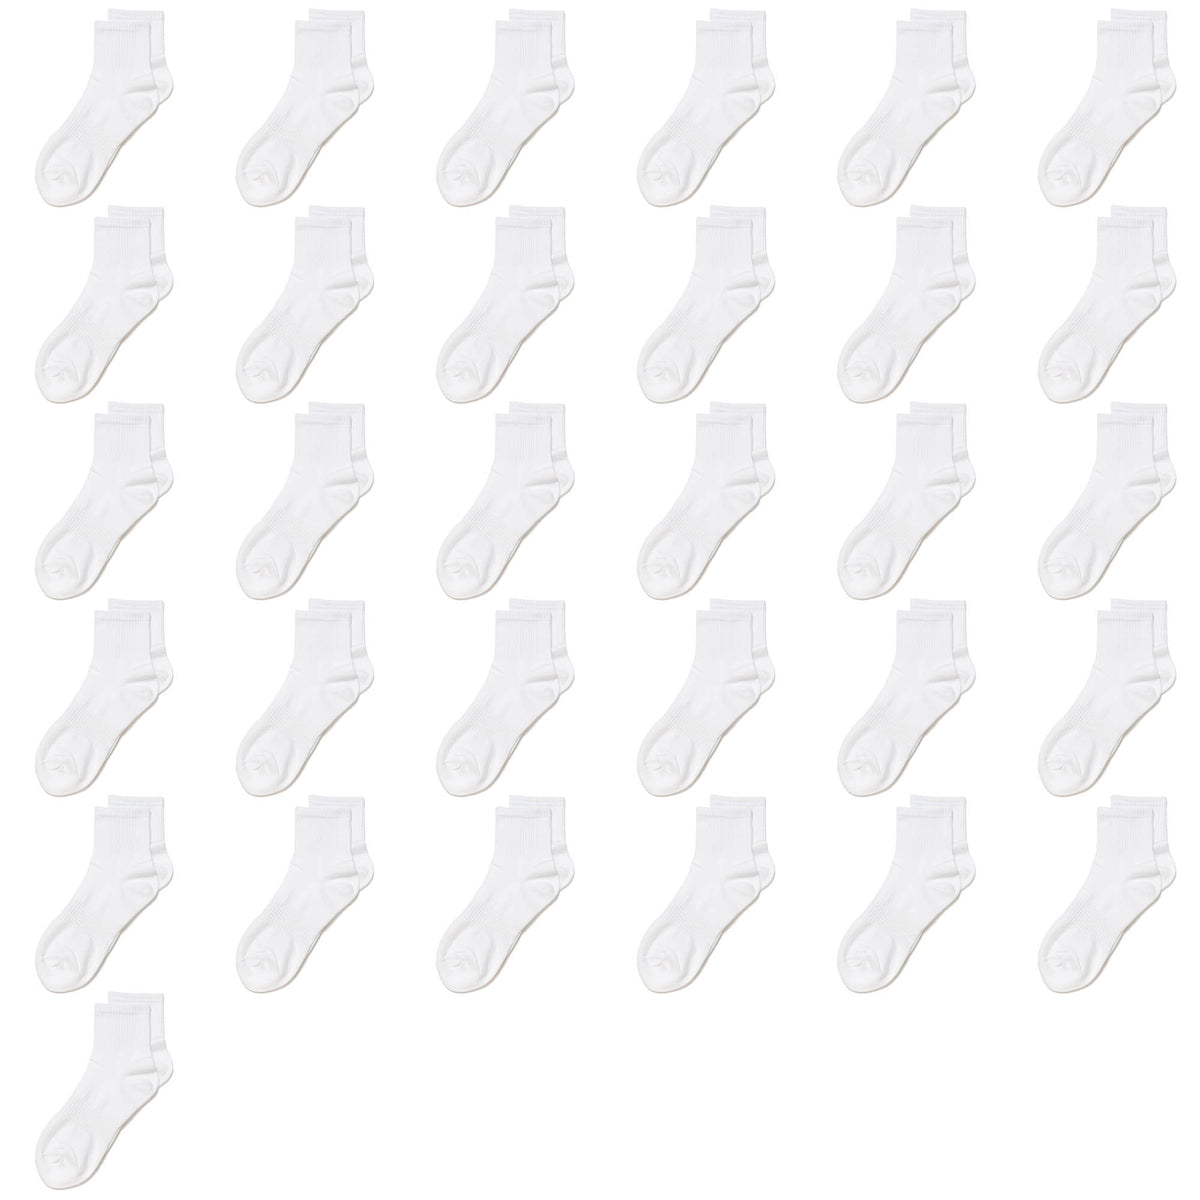 31 Pairs of High Cotton Mid Ankle Men's Socks With Anti-Fungal Powder